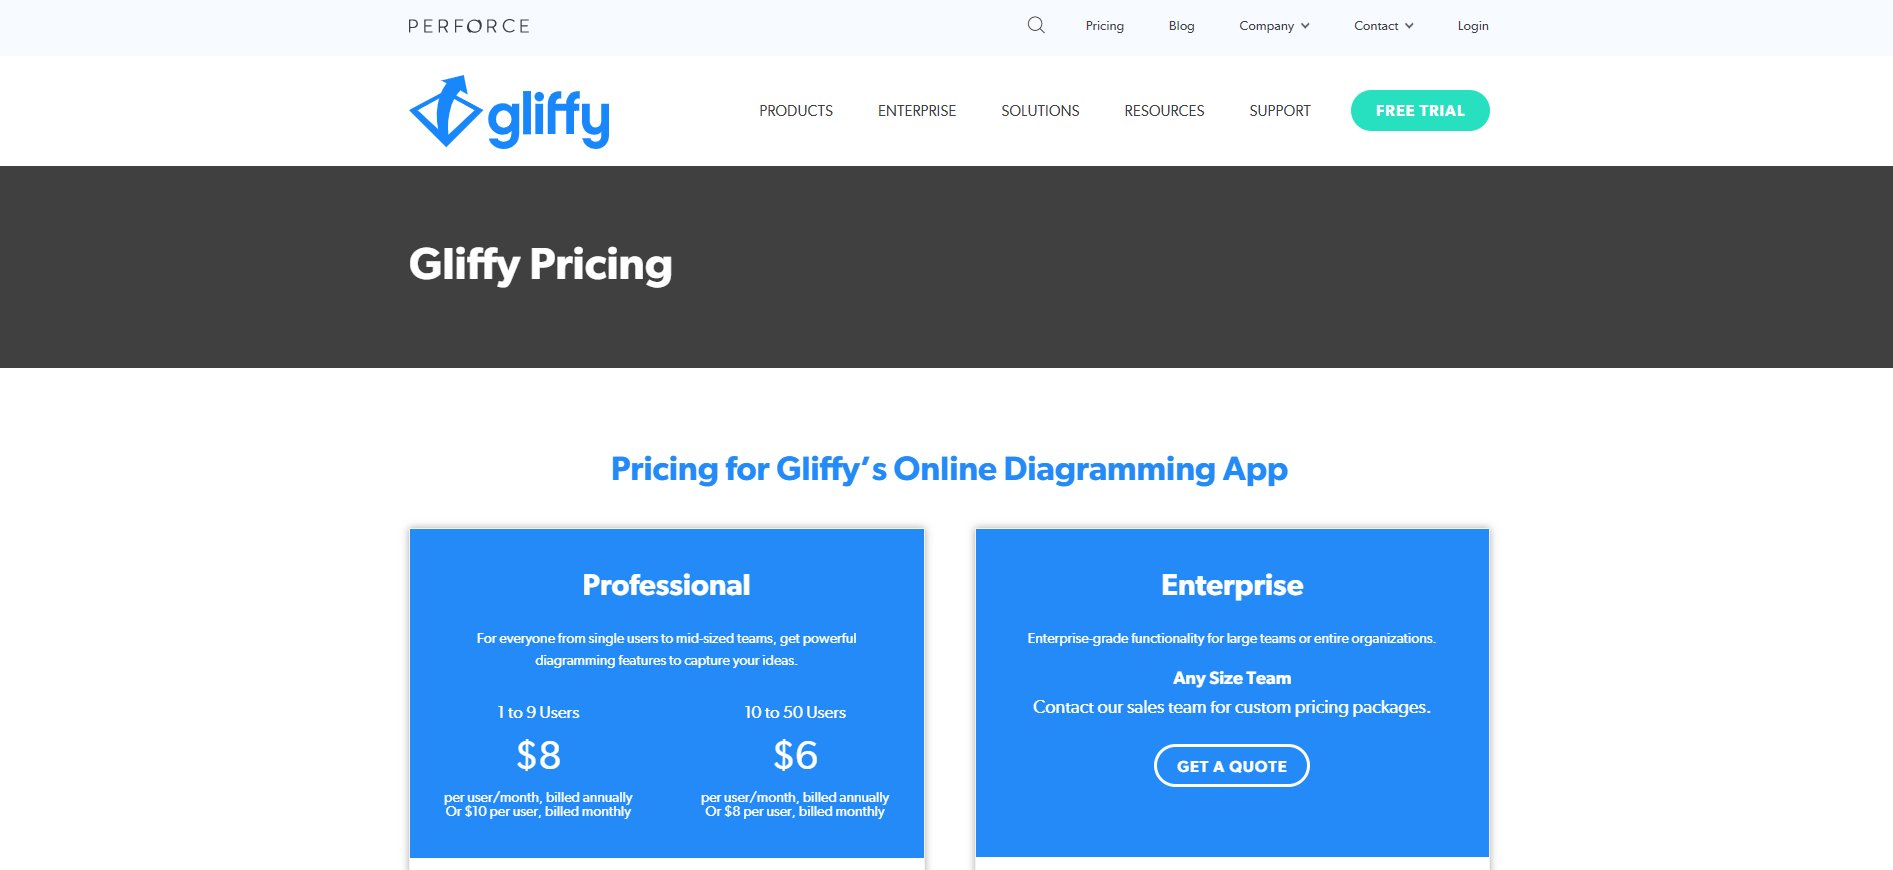 Giffy Pricing